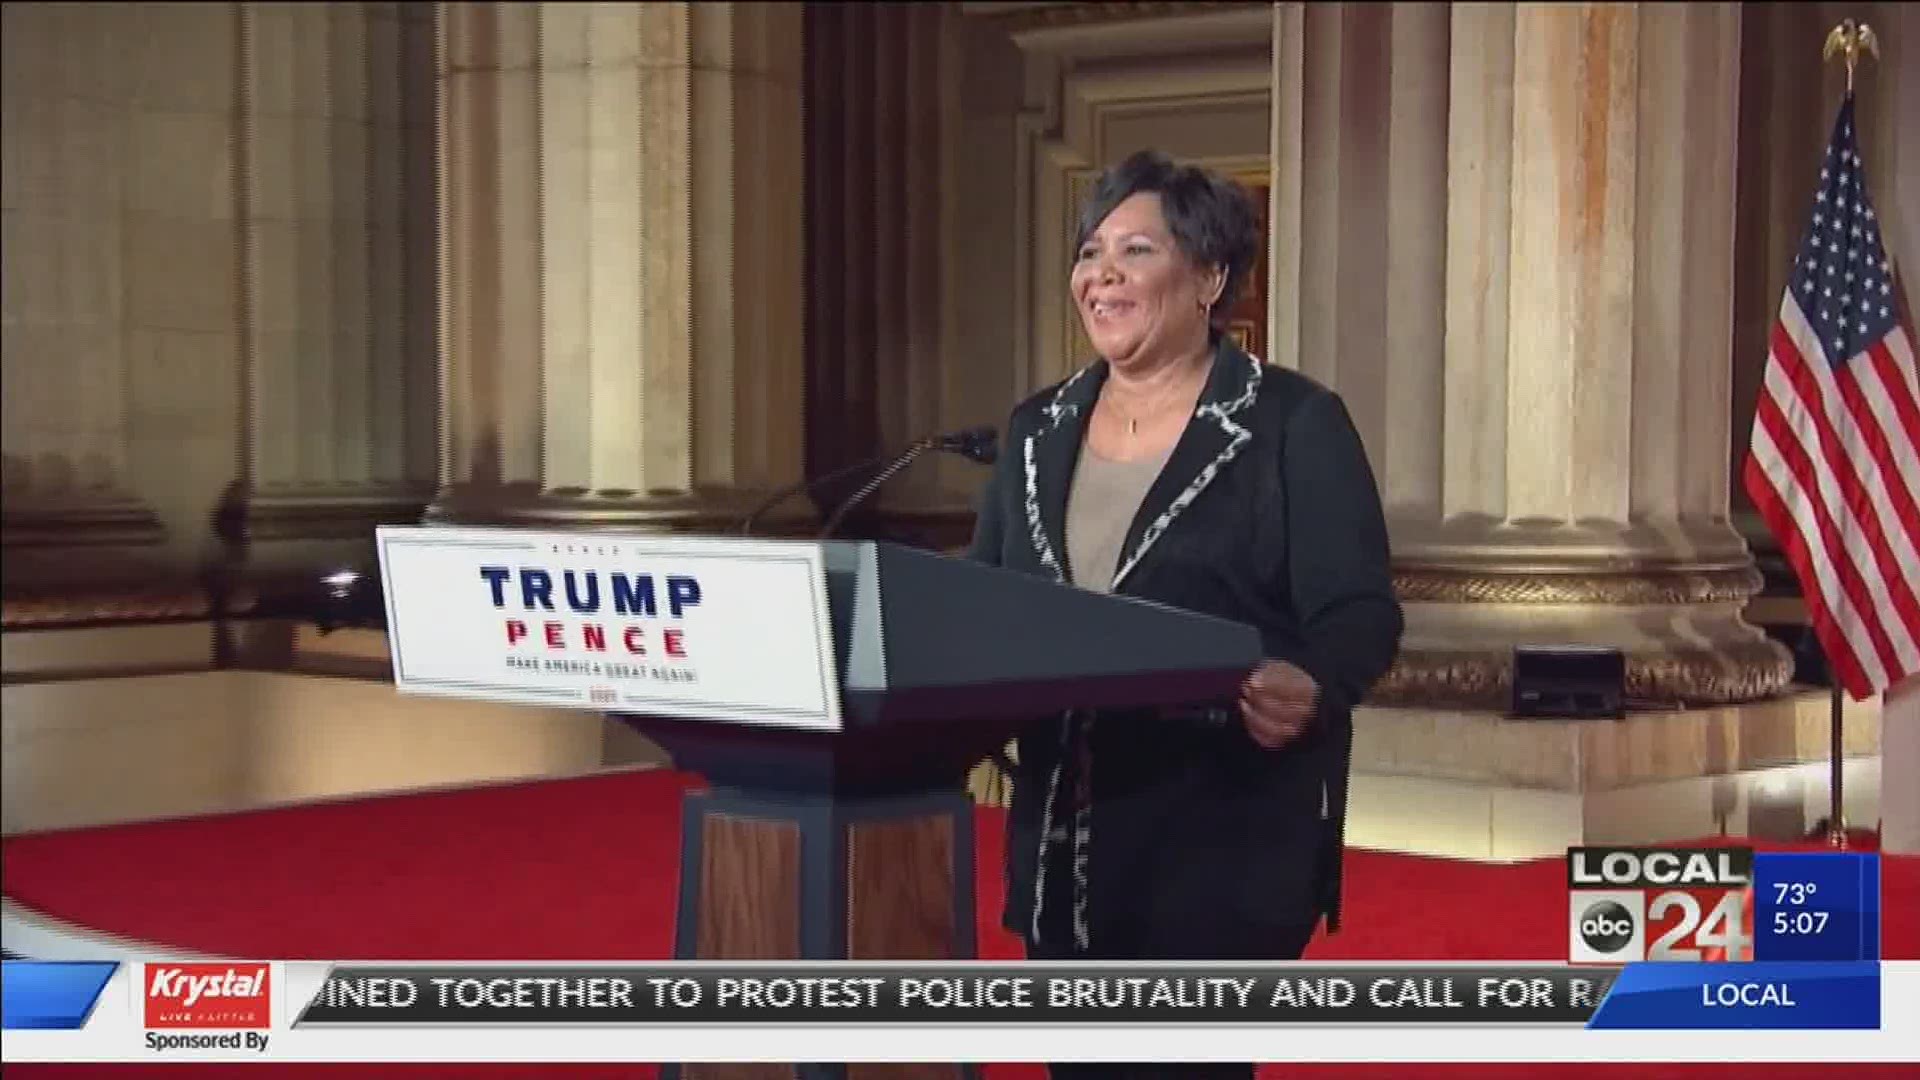 Trump on Friday pardoned Alice Marie Johnson, who had spent more than two decades serving life without parole for a nonviolent drug offense.